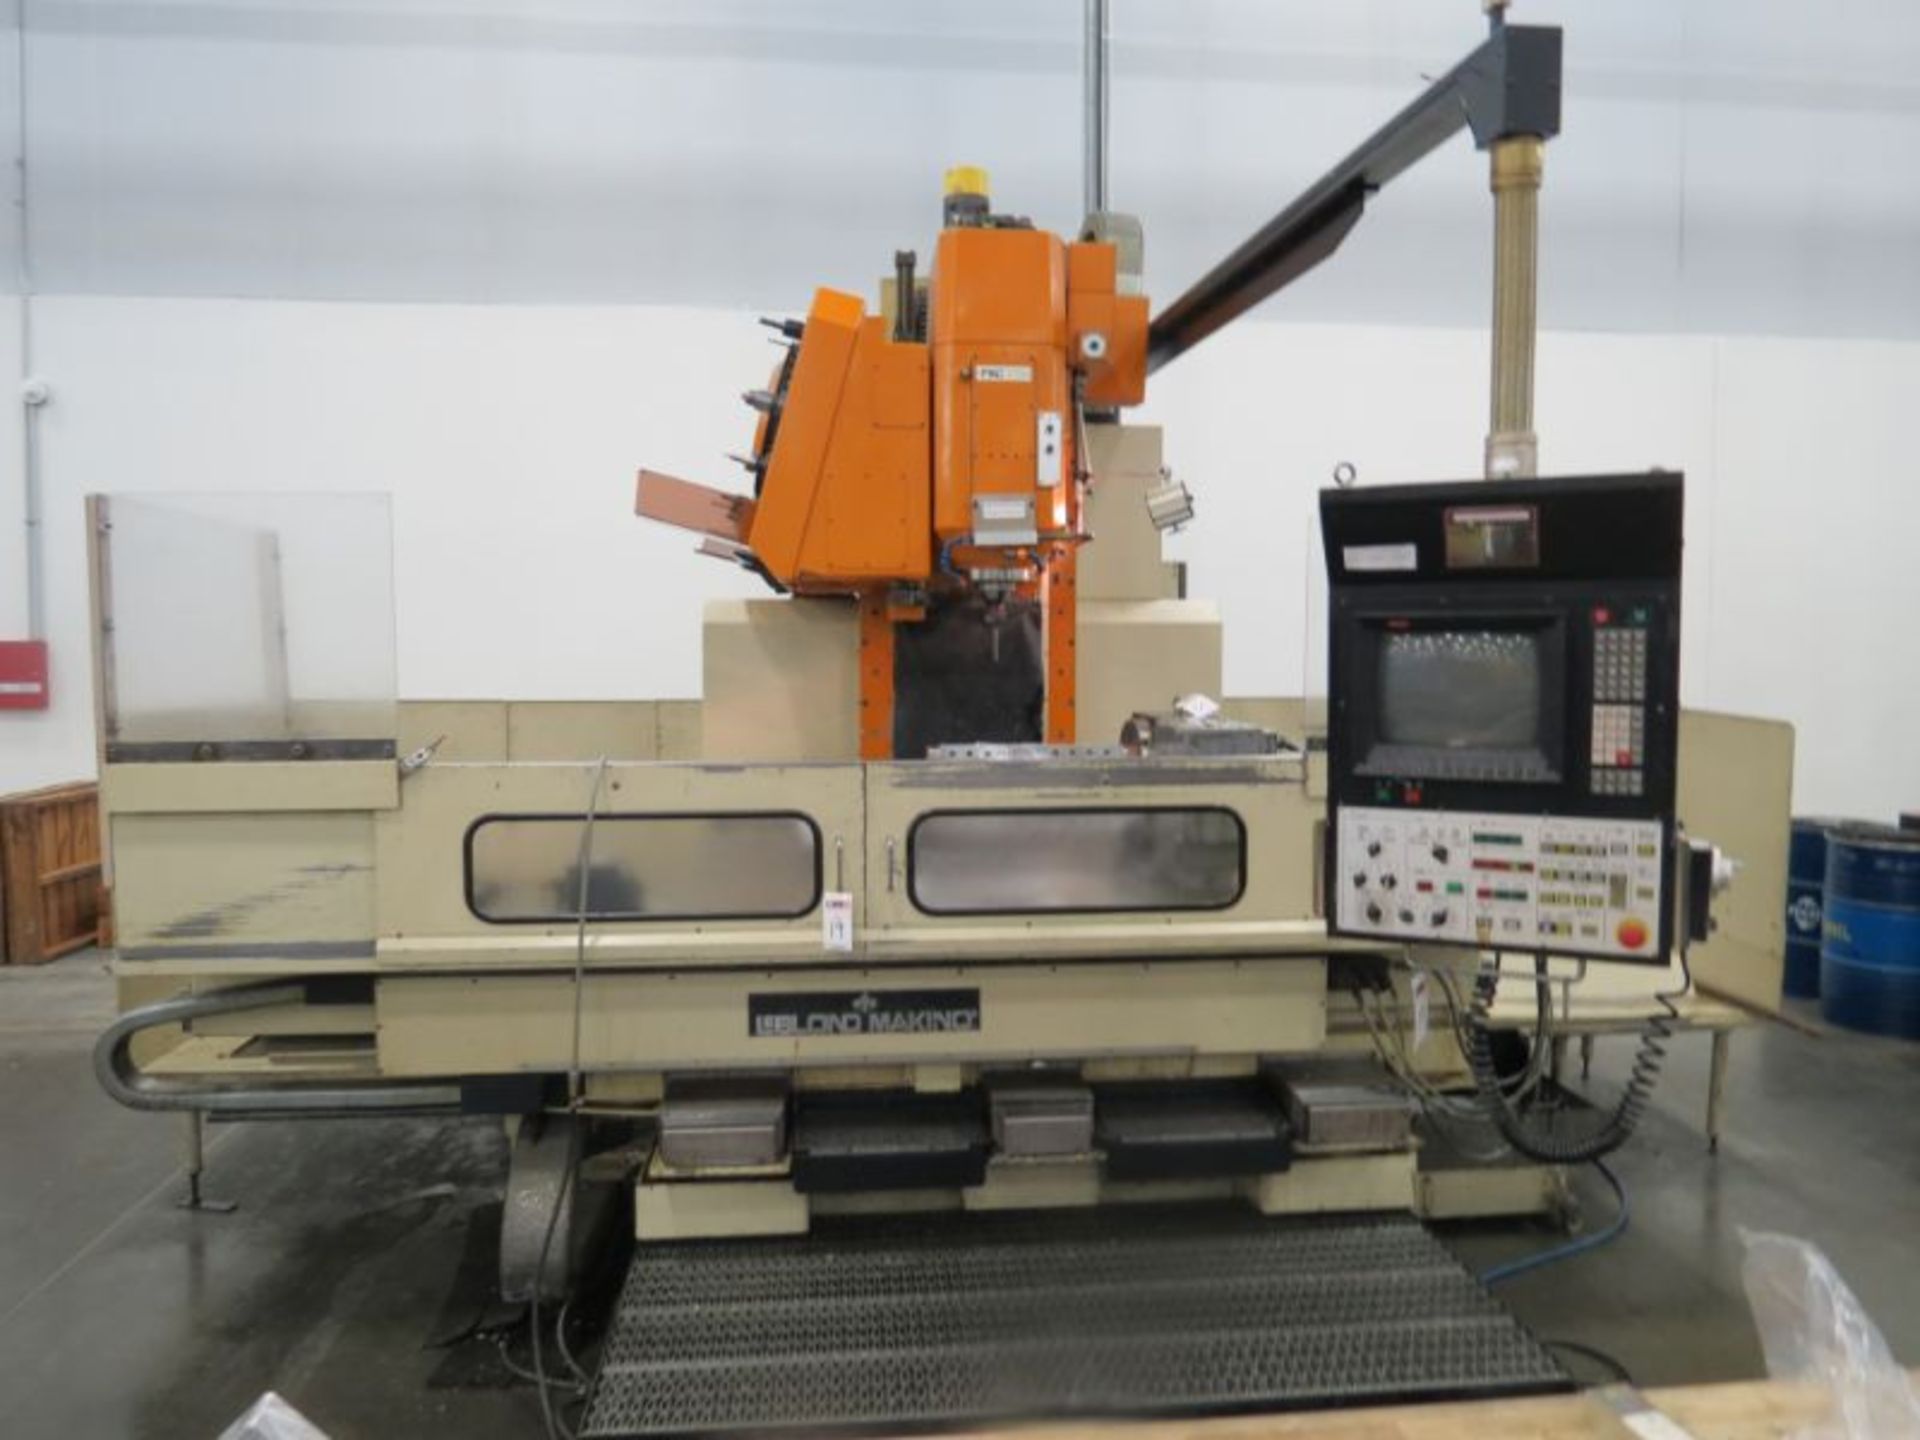 LeBlond Makino FNC 178 4-Axis CNC VMC, Fanuc 11M Ctrl, 3200 rpm, 30 ATC (Rotary Table Sold Seperate) - Image 2 of 6